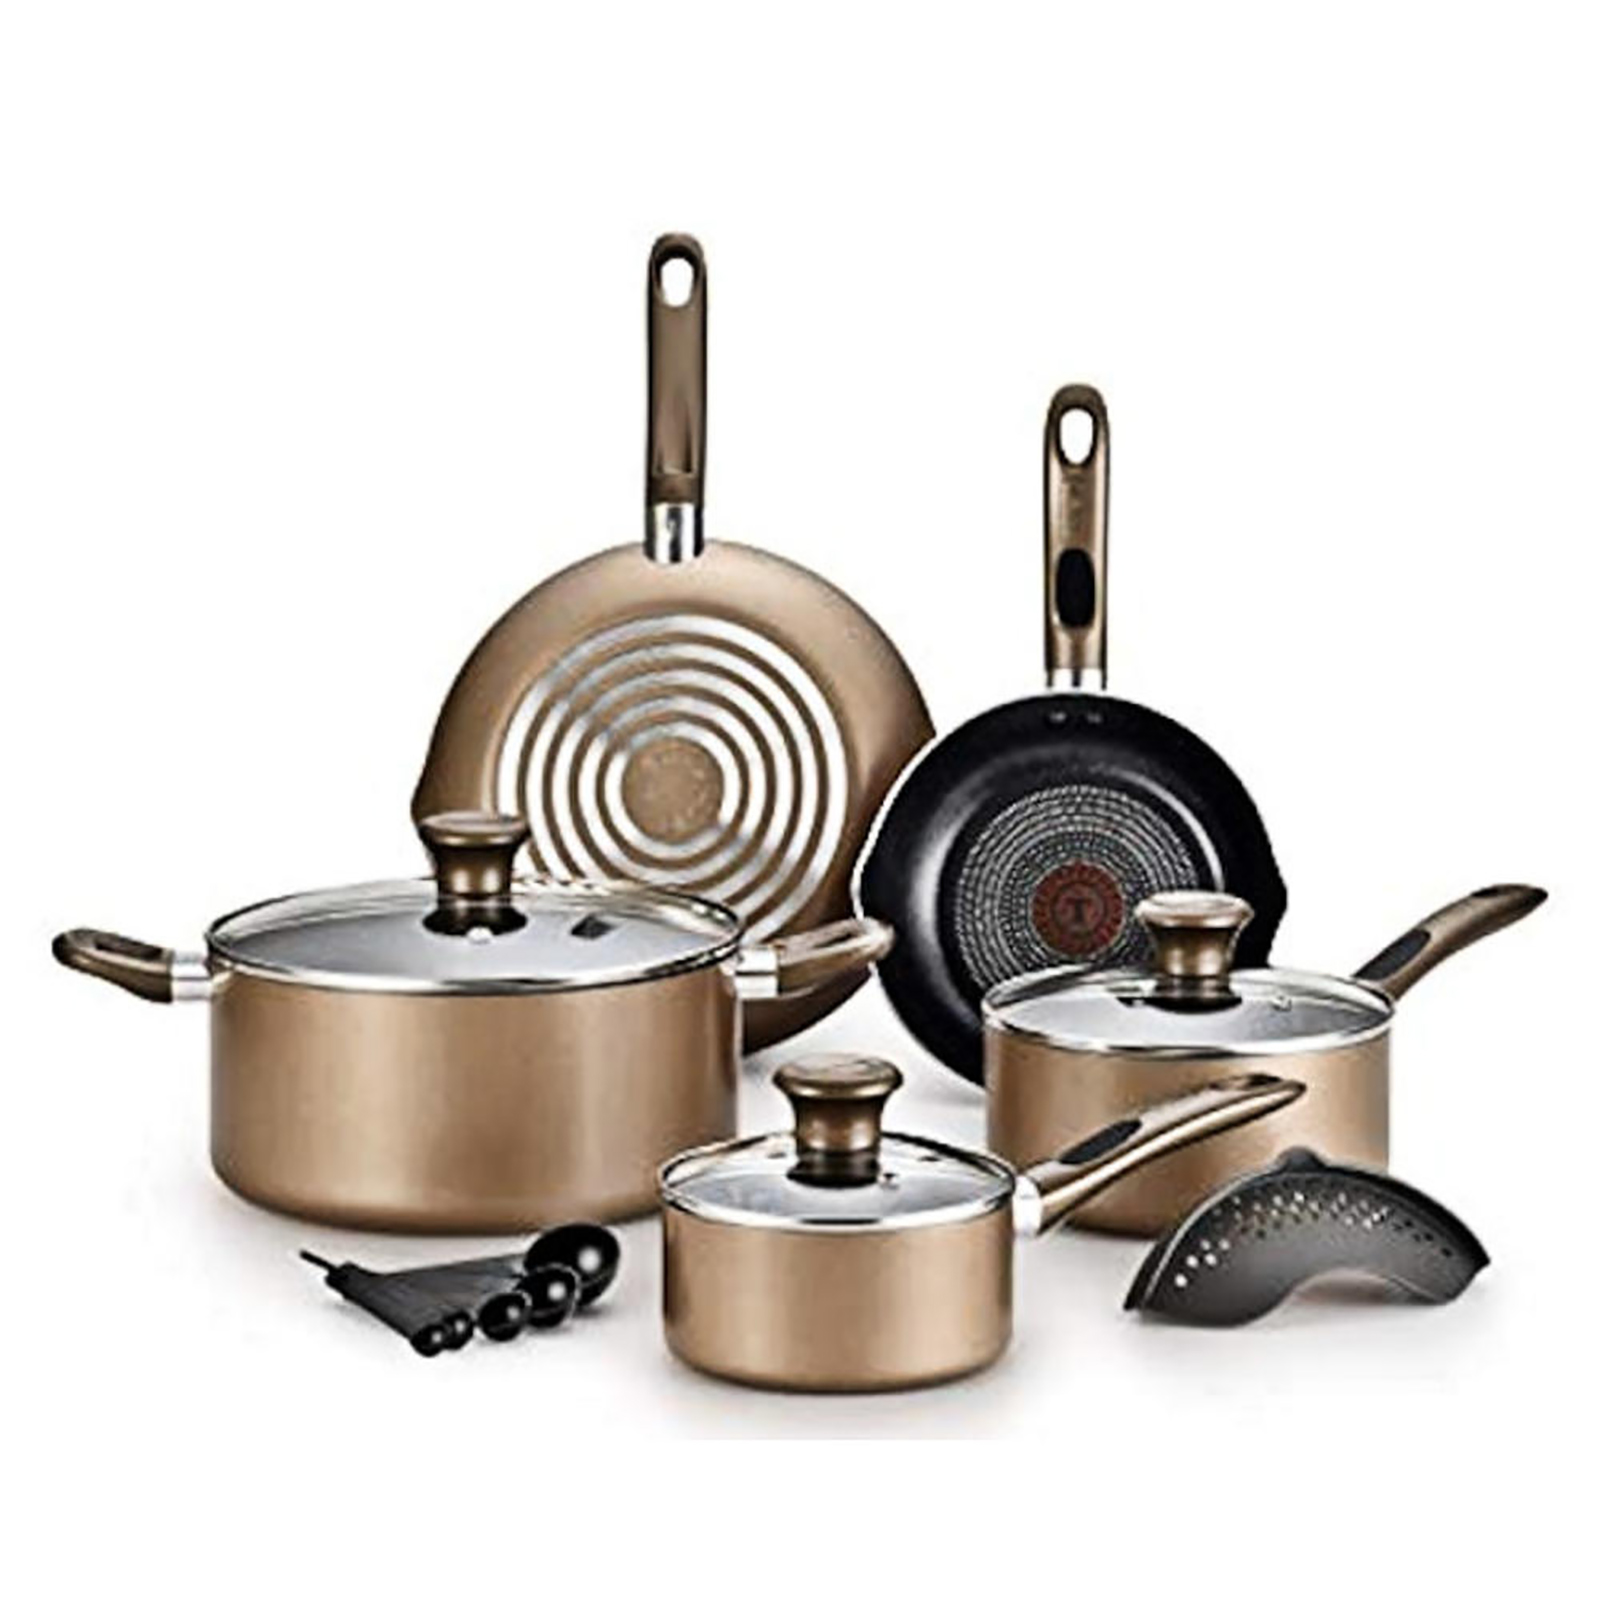 T-fal Excite Thermo-spot 14pc. Cookware Set - Bronze